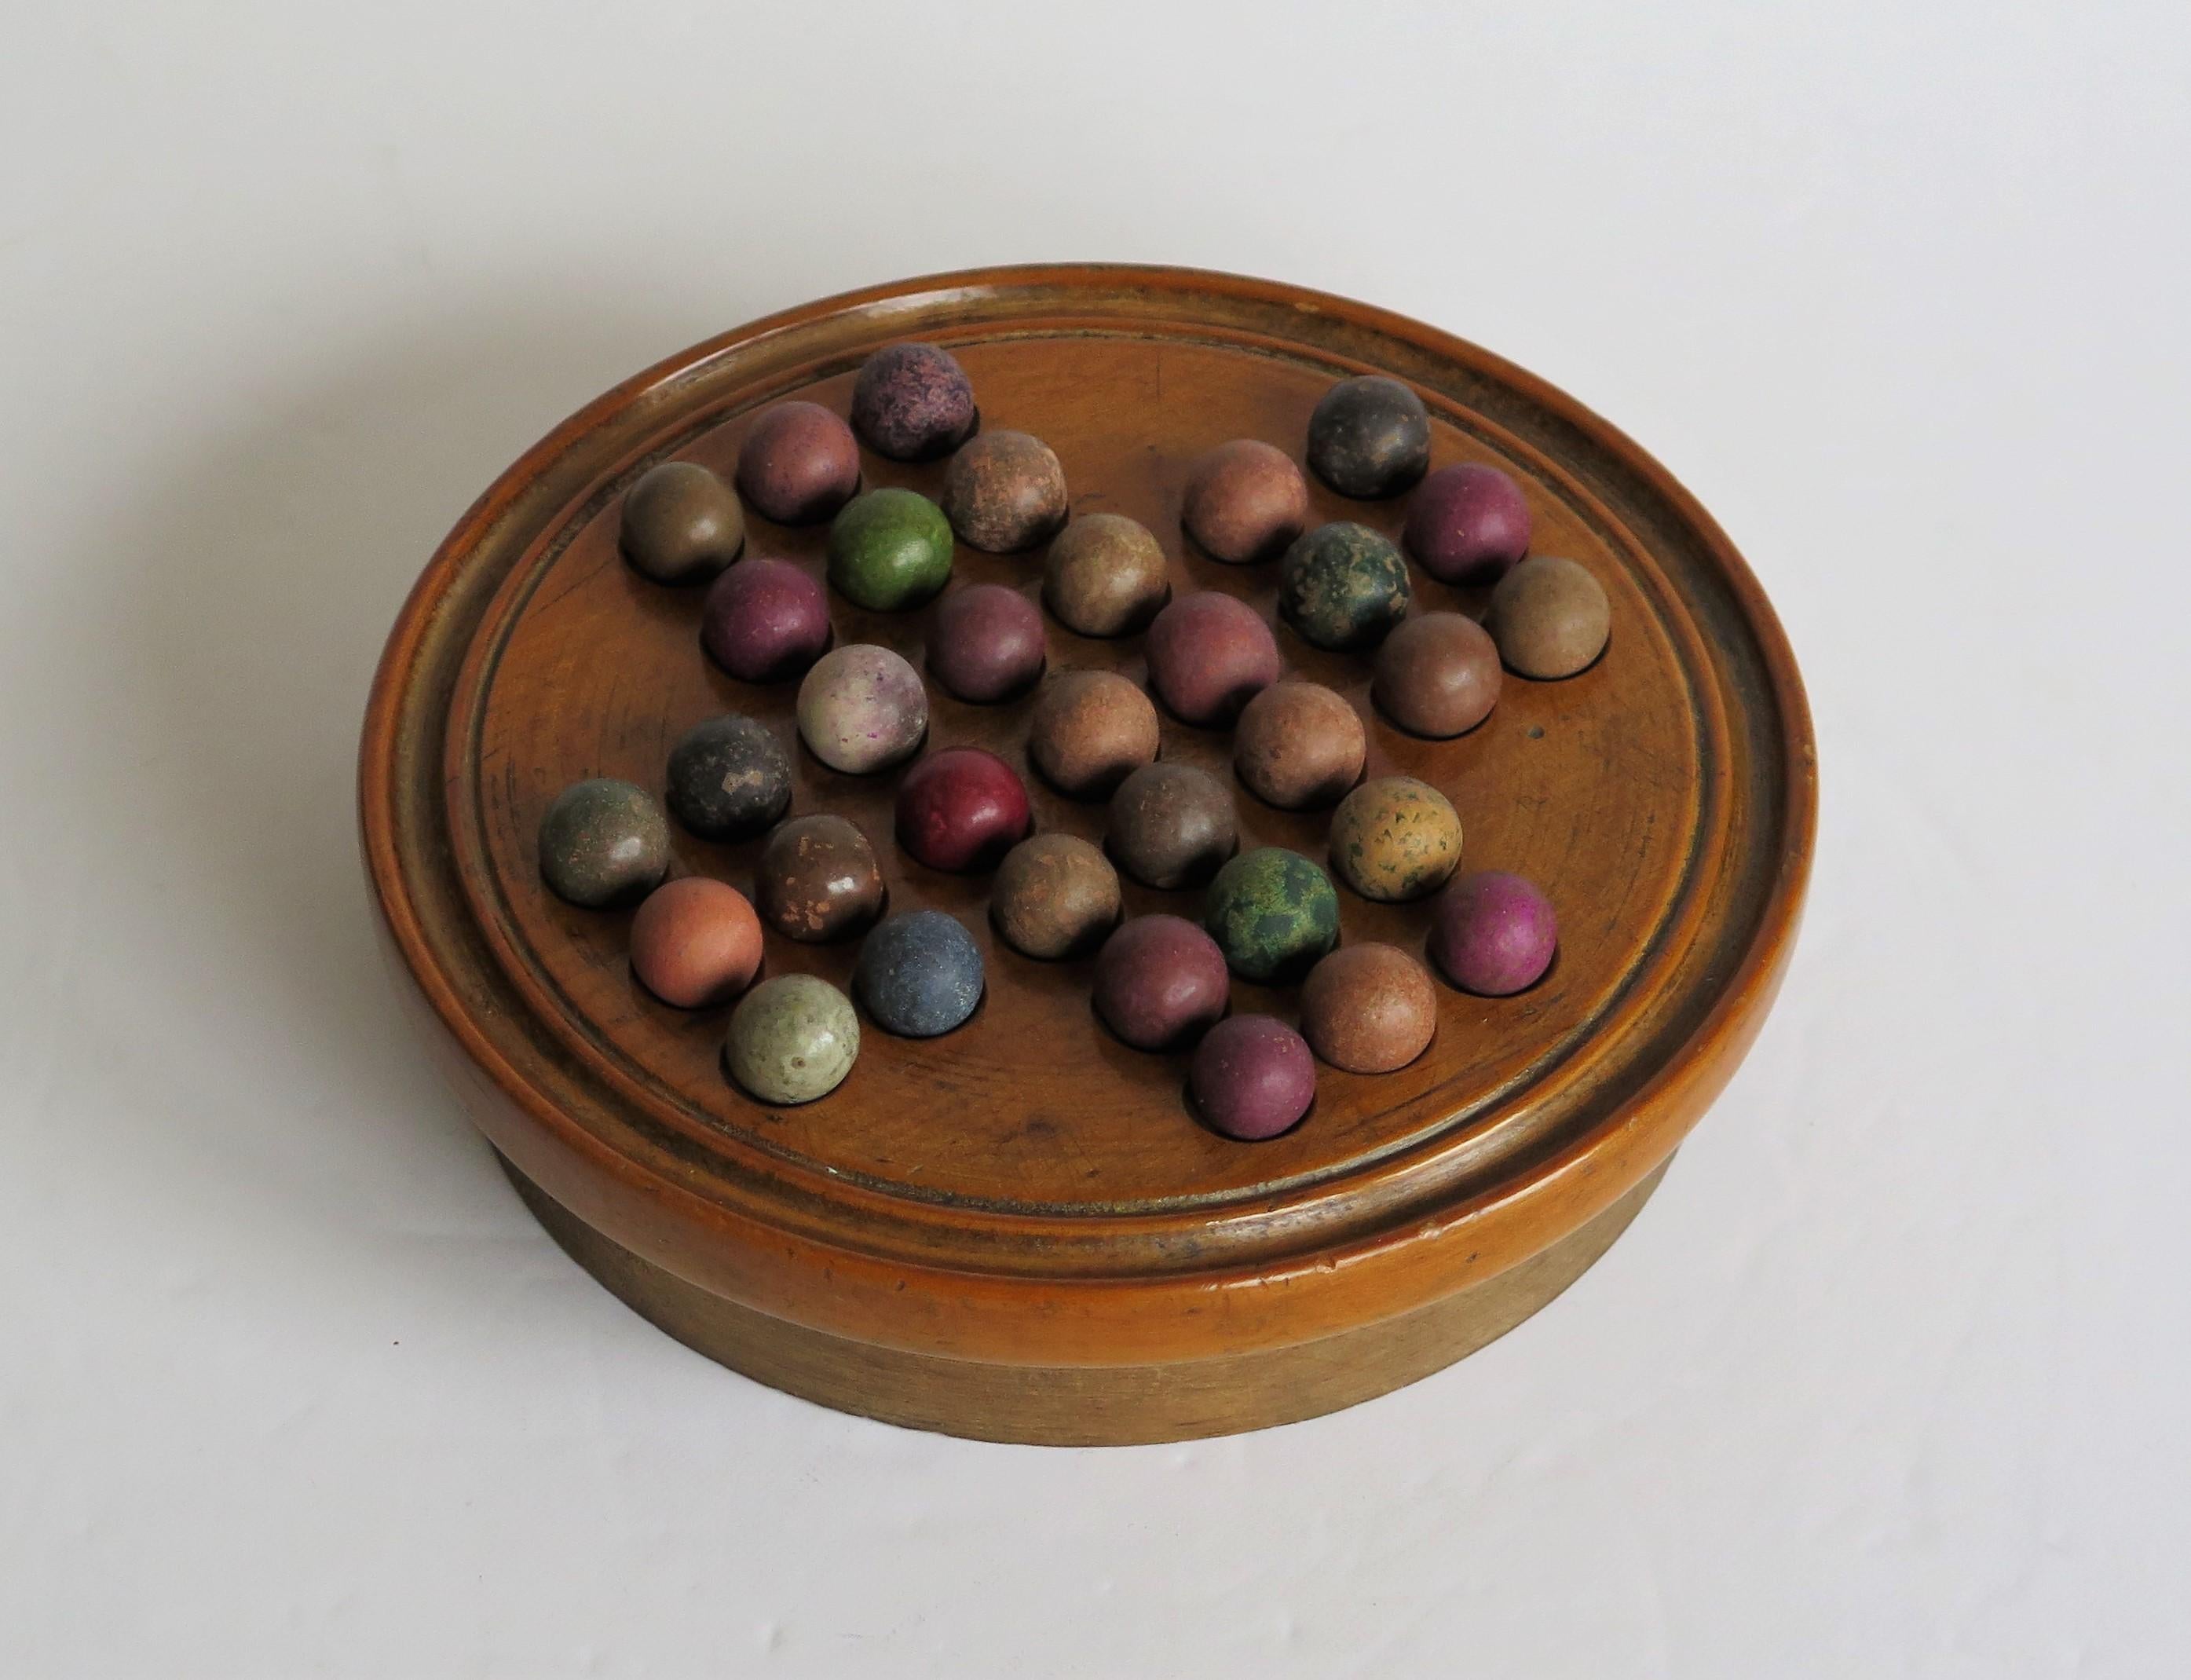 This is an original and complete game of travelling marble solitaire from the 19th century with 33 old clay and stone marbles, circa 1870.

This two-piece board has a fairly small diameter and is unusual in that it has a circular open wood base